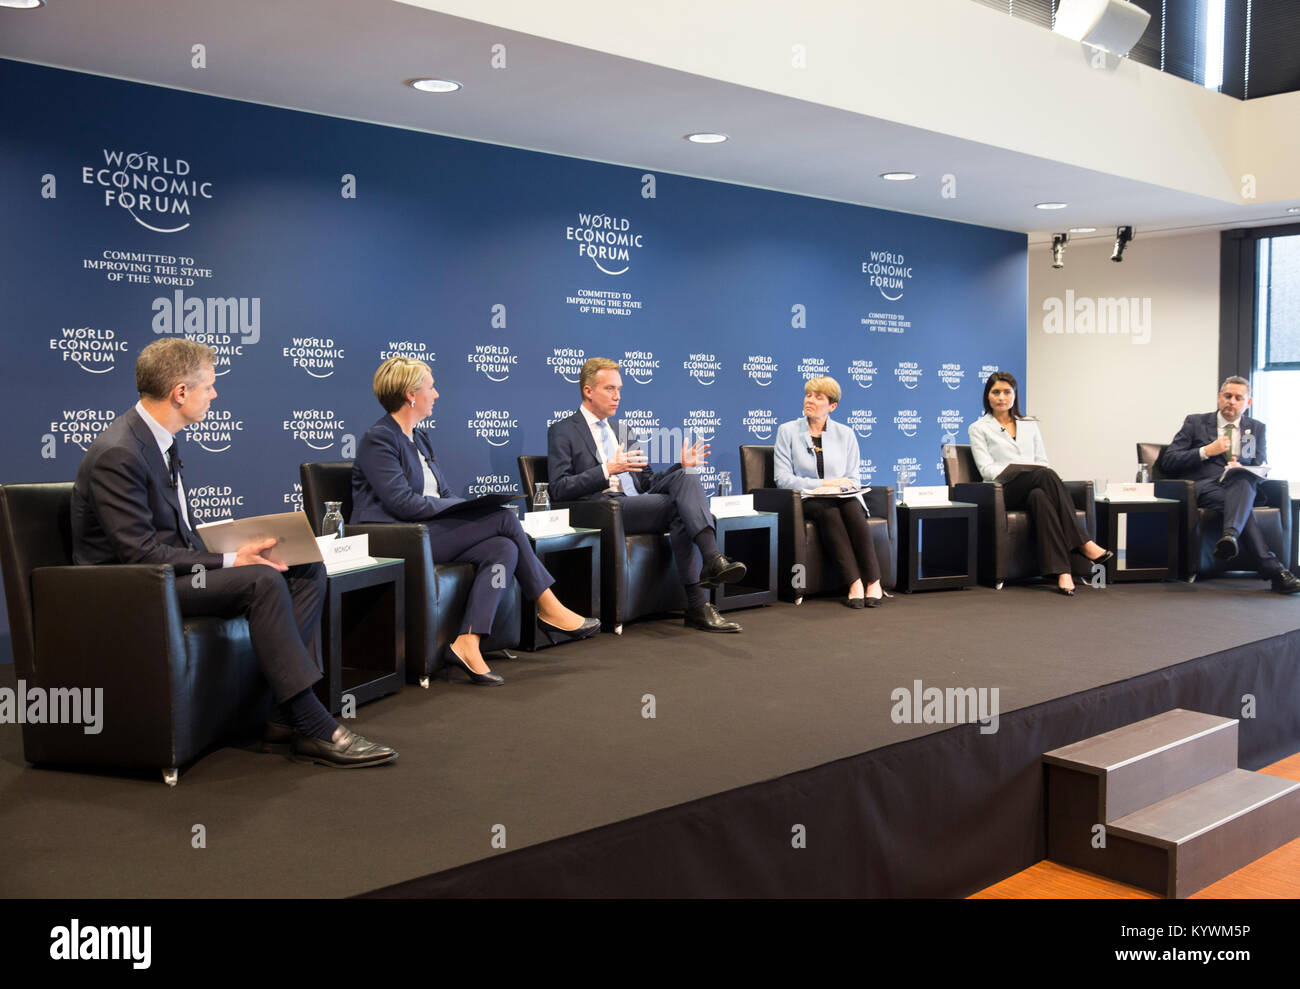 Geneva, Switzerland. 16th Jan, 2018. Borge Brende (3rd L), the president of the World Economic Forum (WEF), gestures at a press conference in Geneva, Switzerland, Jan. 16, 2018. Some 70 heads of state and government and 38 heads of international organizations will debate 'creating a shared future in a fractured world' -- the theme of this year's World Economic Forum in Davos from Jan. 23 to Jan. 26. Credit: Xu Jinquan/Xinhua/Alamy Live News Stock Photo